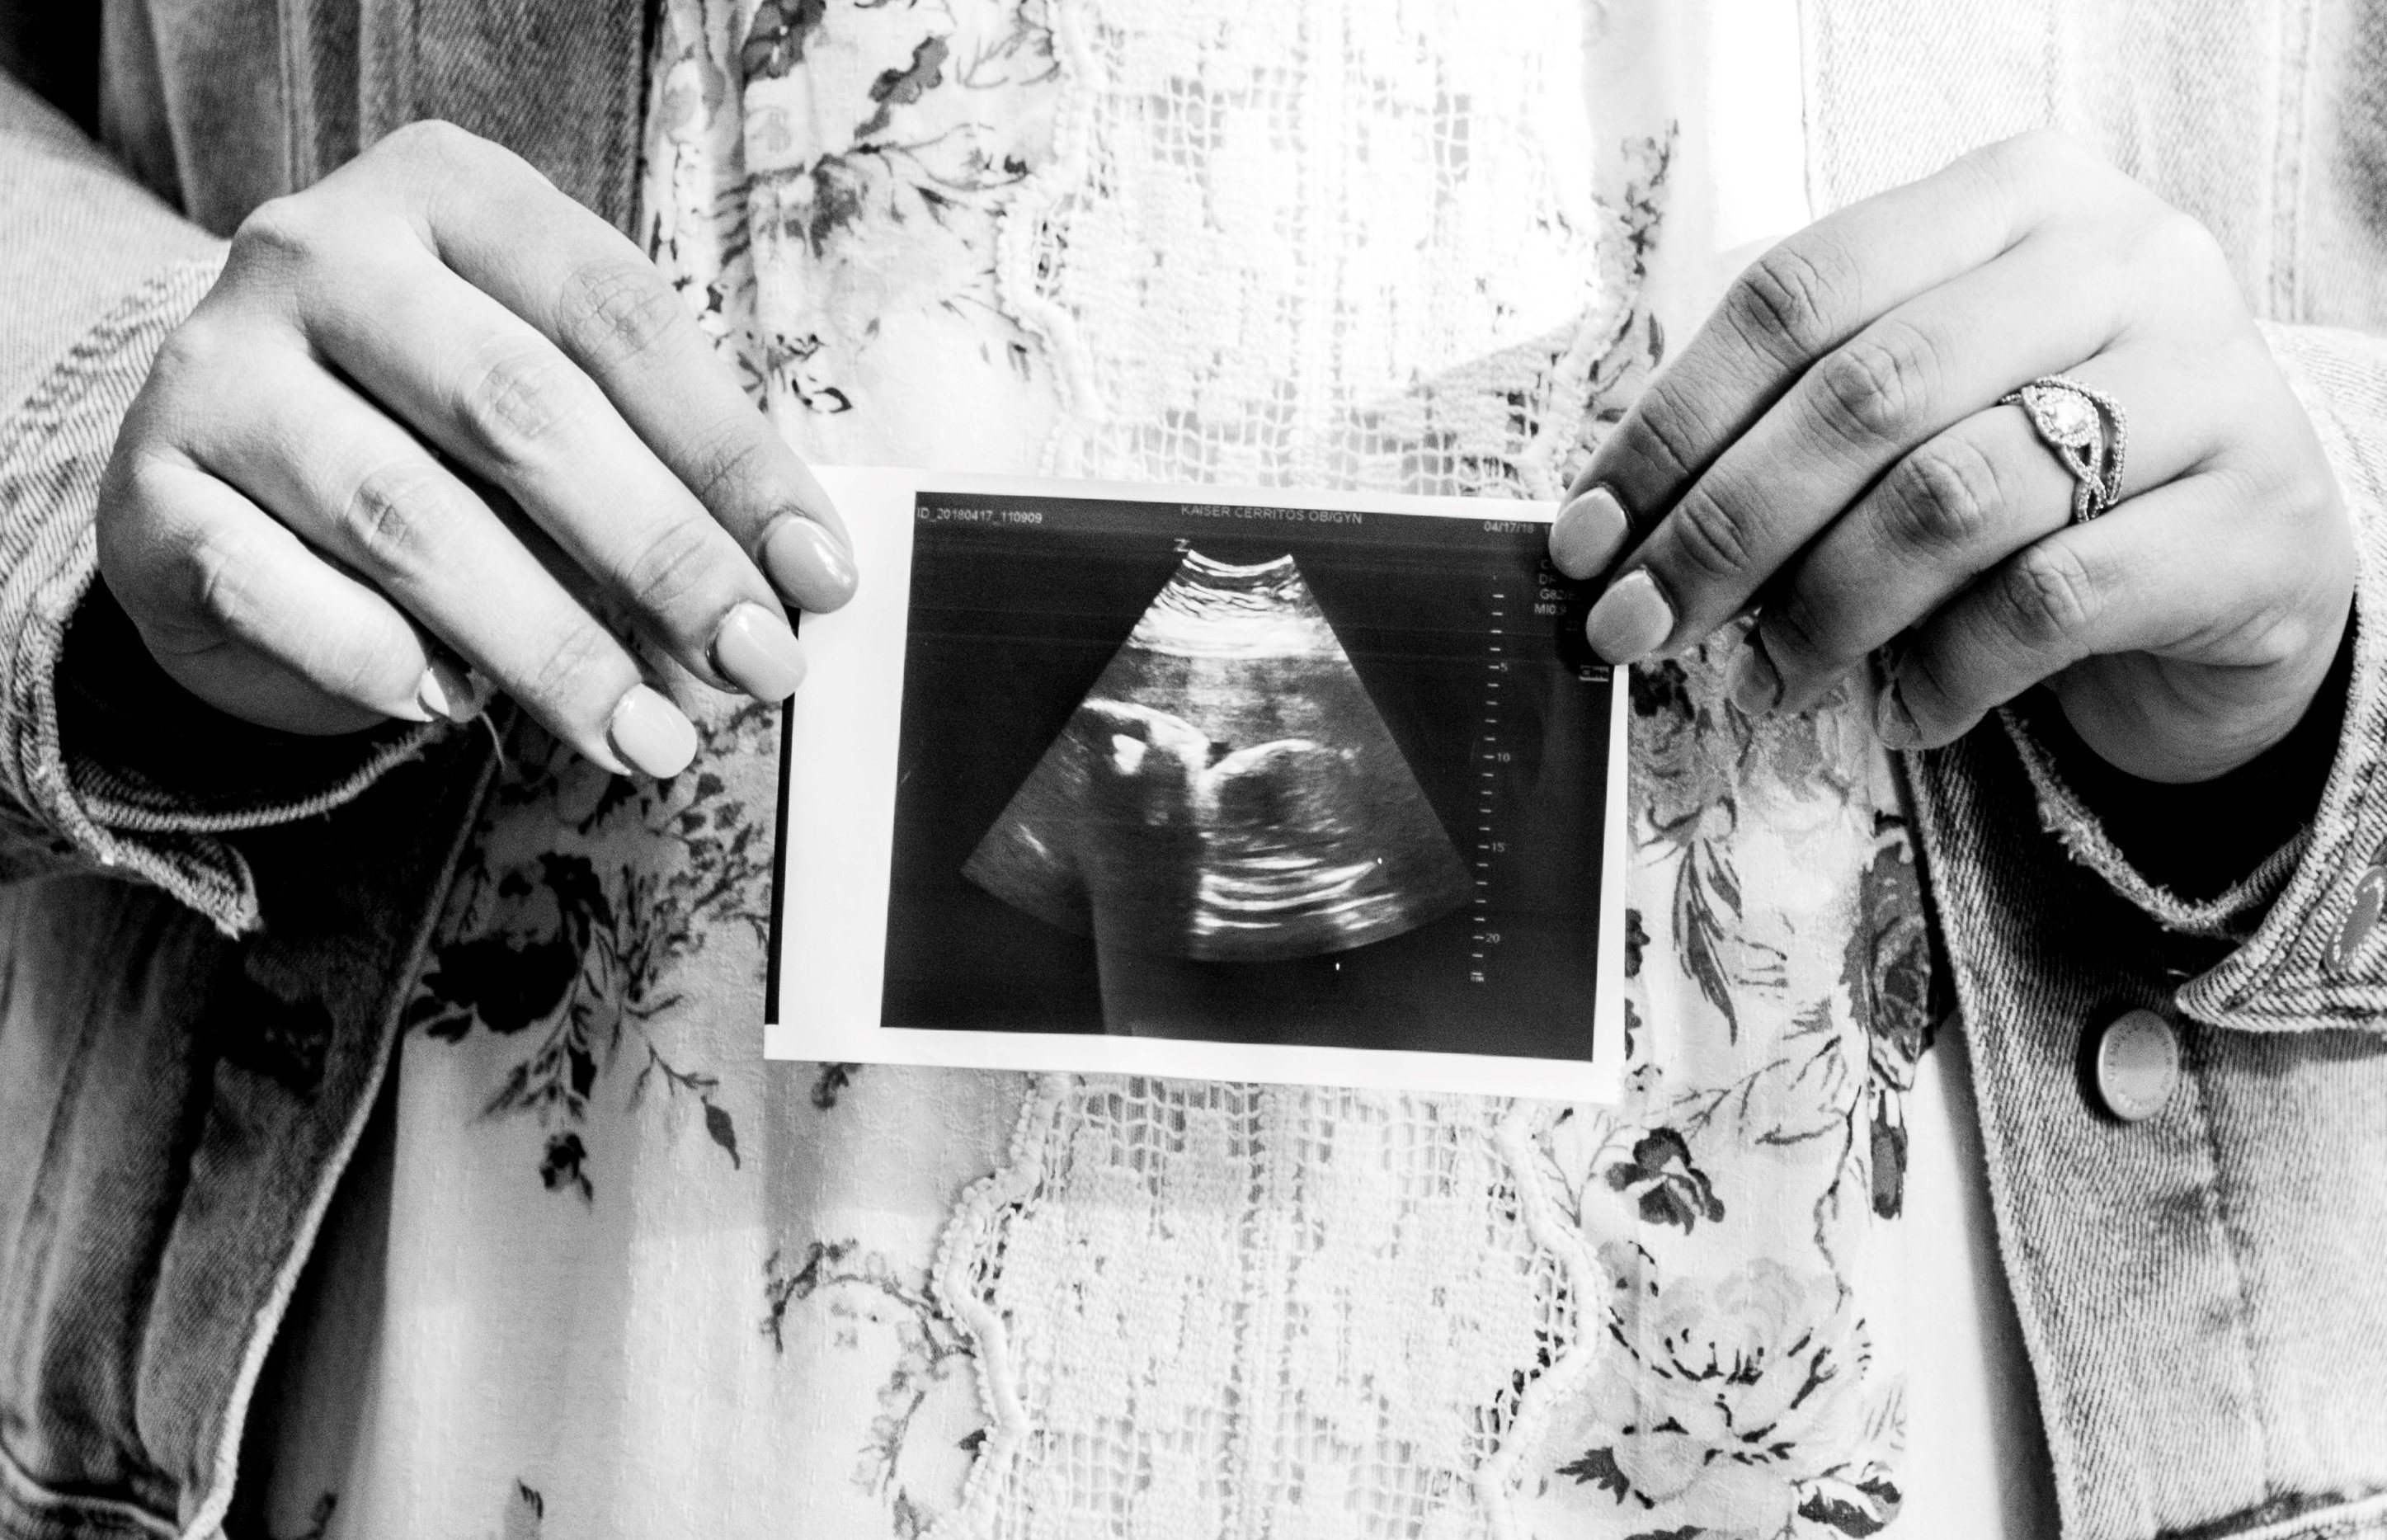 OP's in-laws claimed they suspected OP was pregnant & were looking for ultrasound photos. | Source: Unsplash